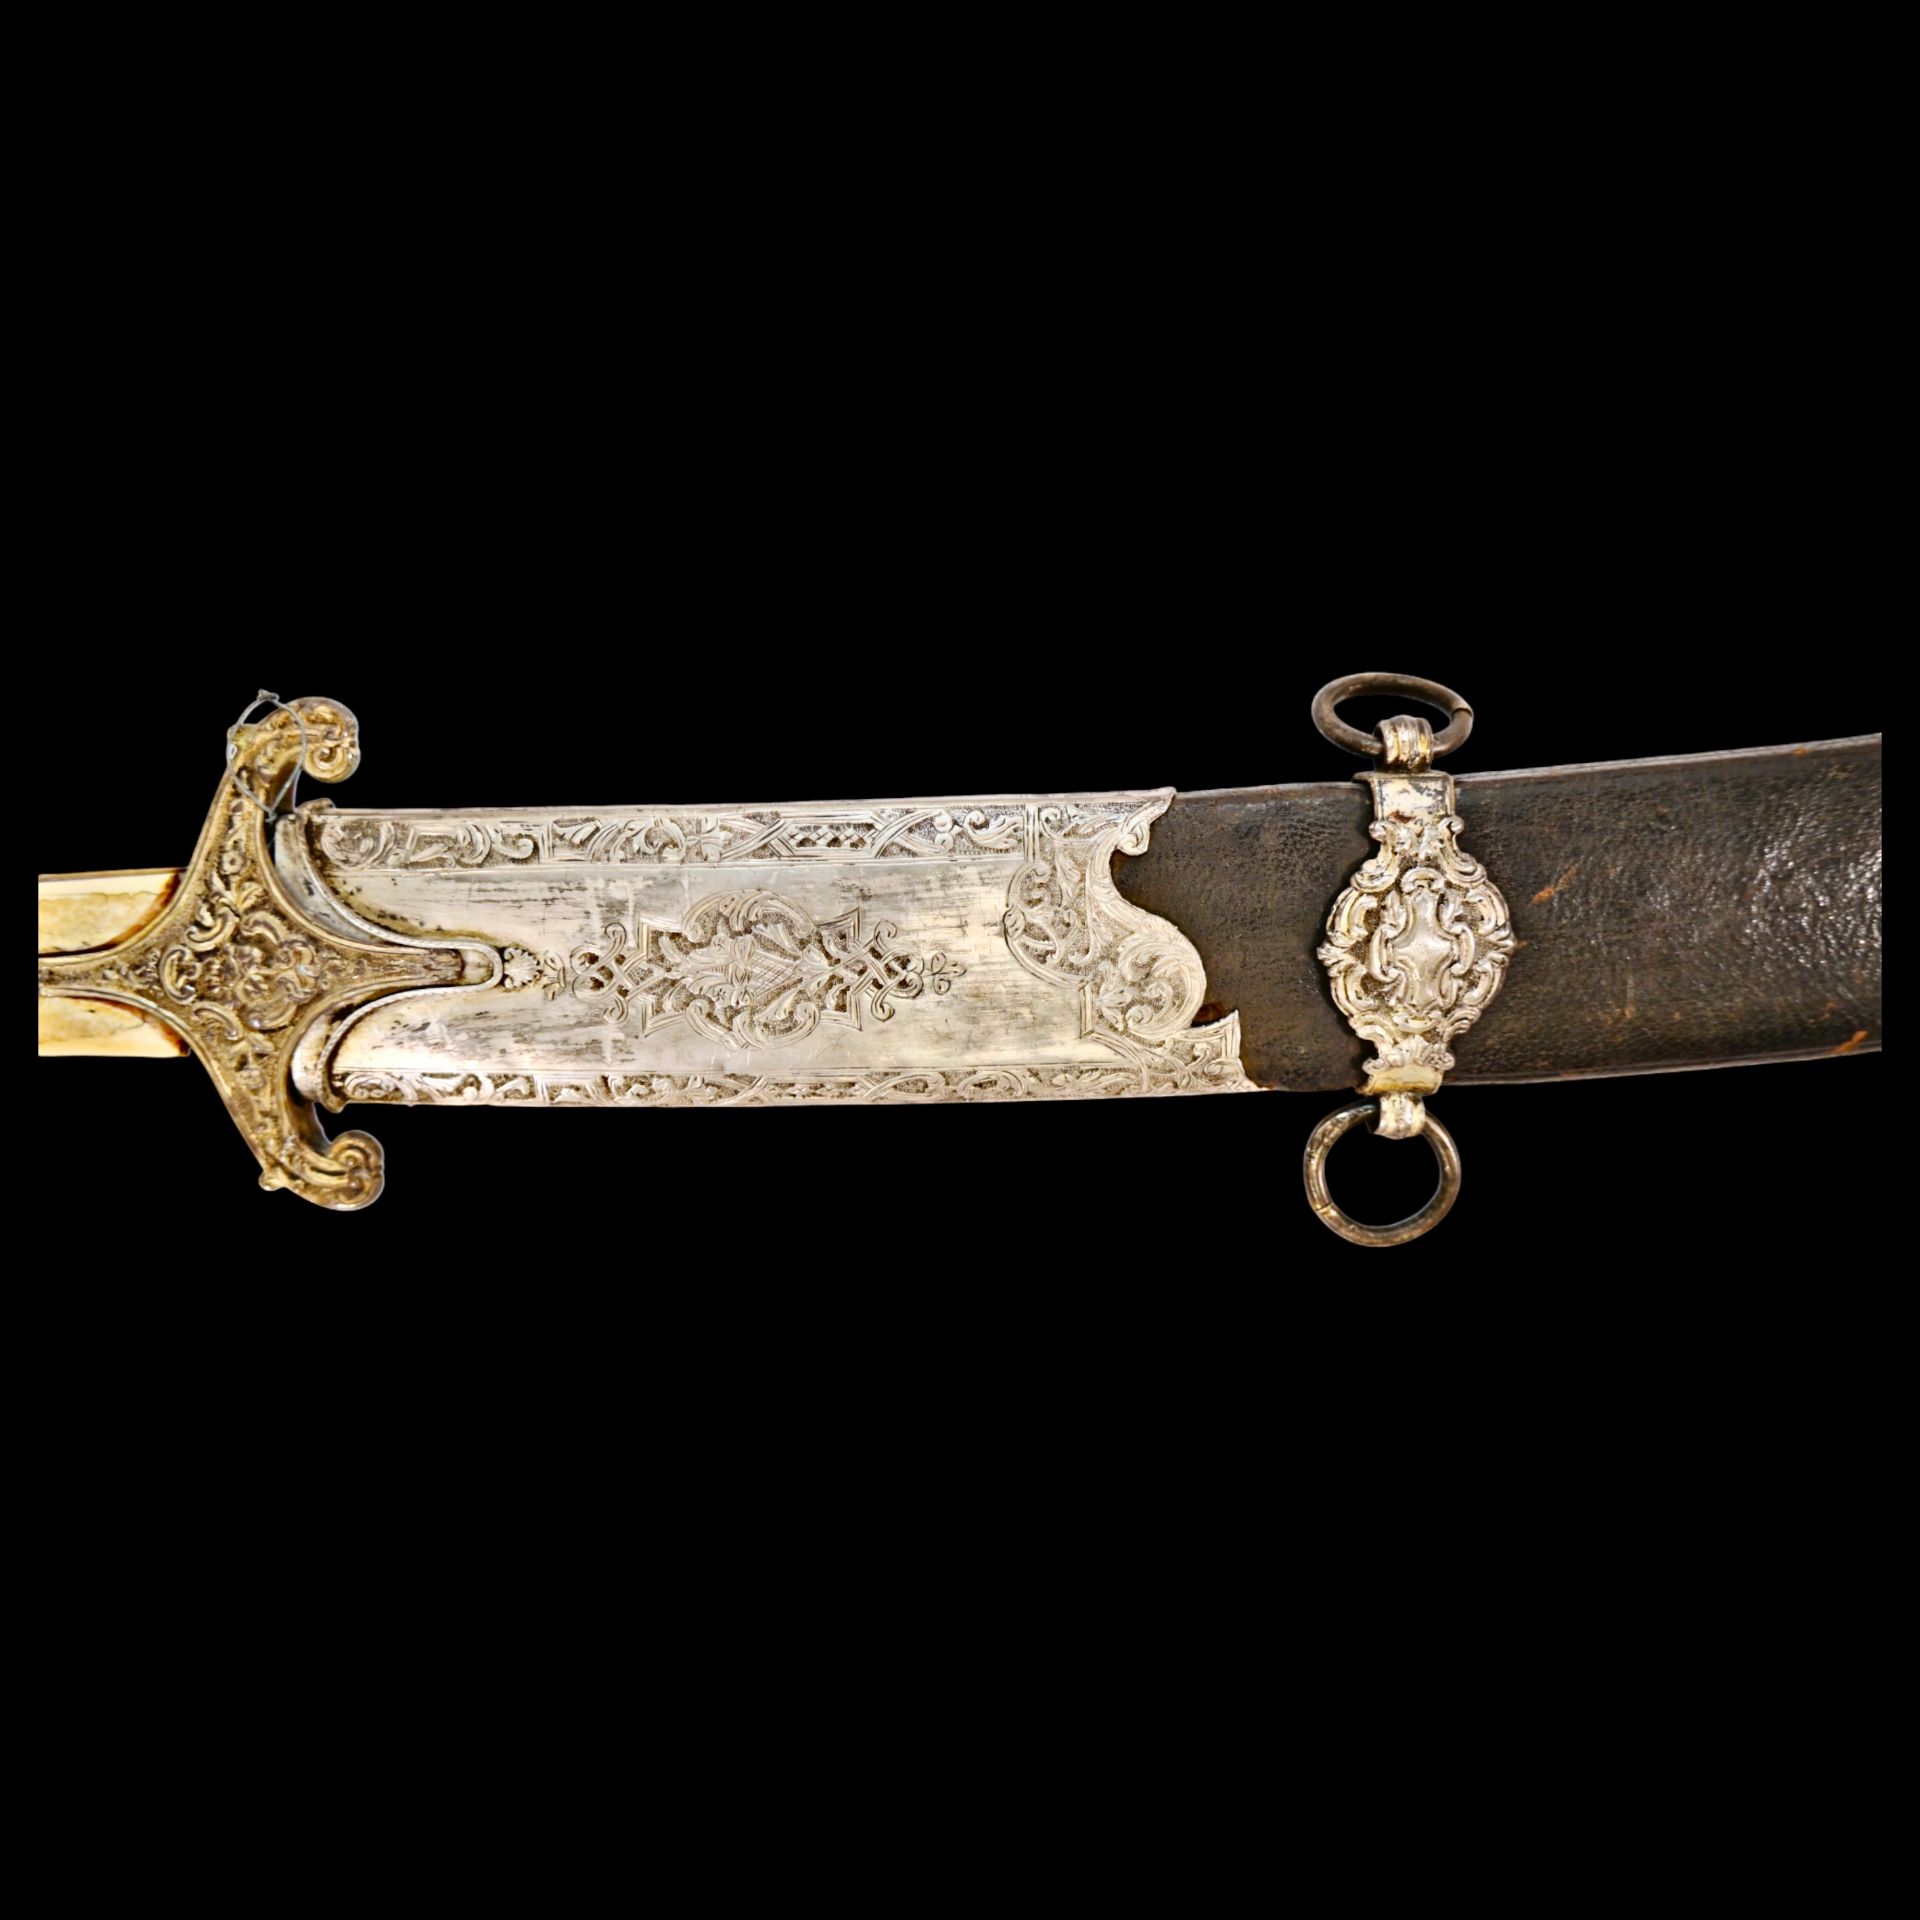 Rare Ottoman saber KARABELA, wootz blade, silver with the tugra of Sultan Ahmed III, early 18th C. - Bild 5 aus 27